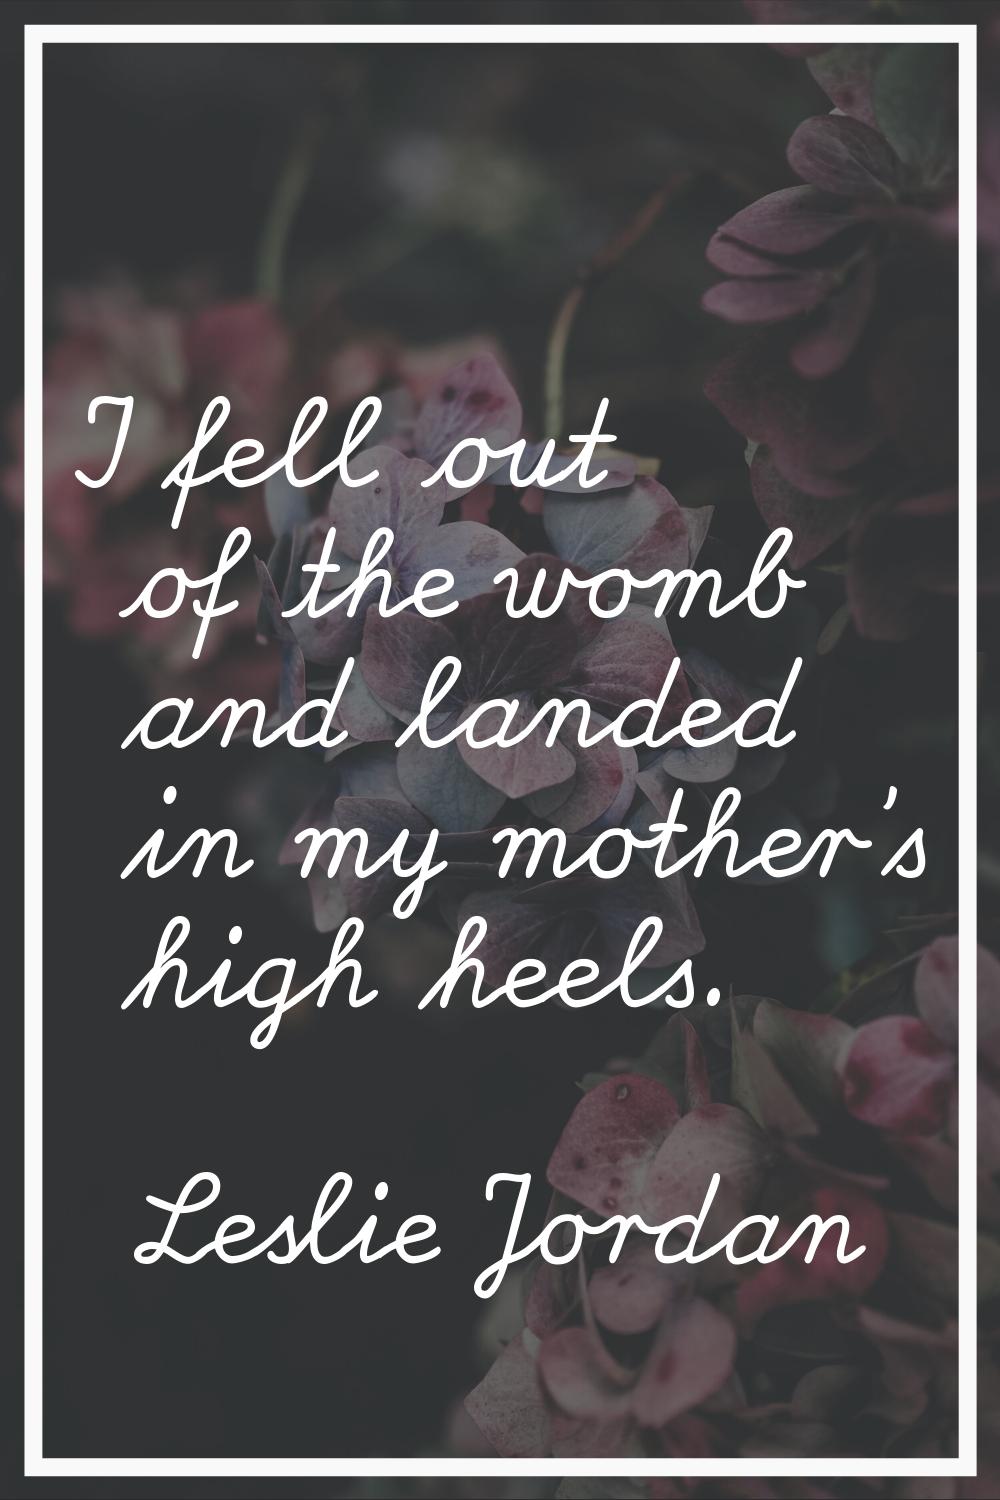 I fell out of the womb and landed in my mother's high heels.